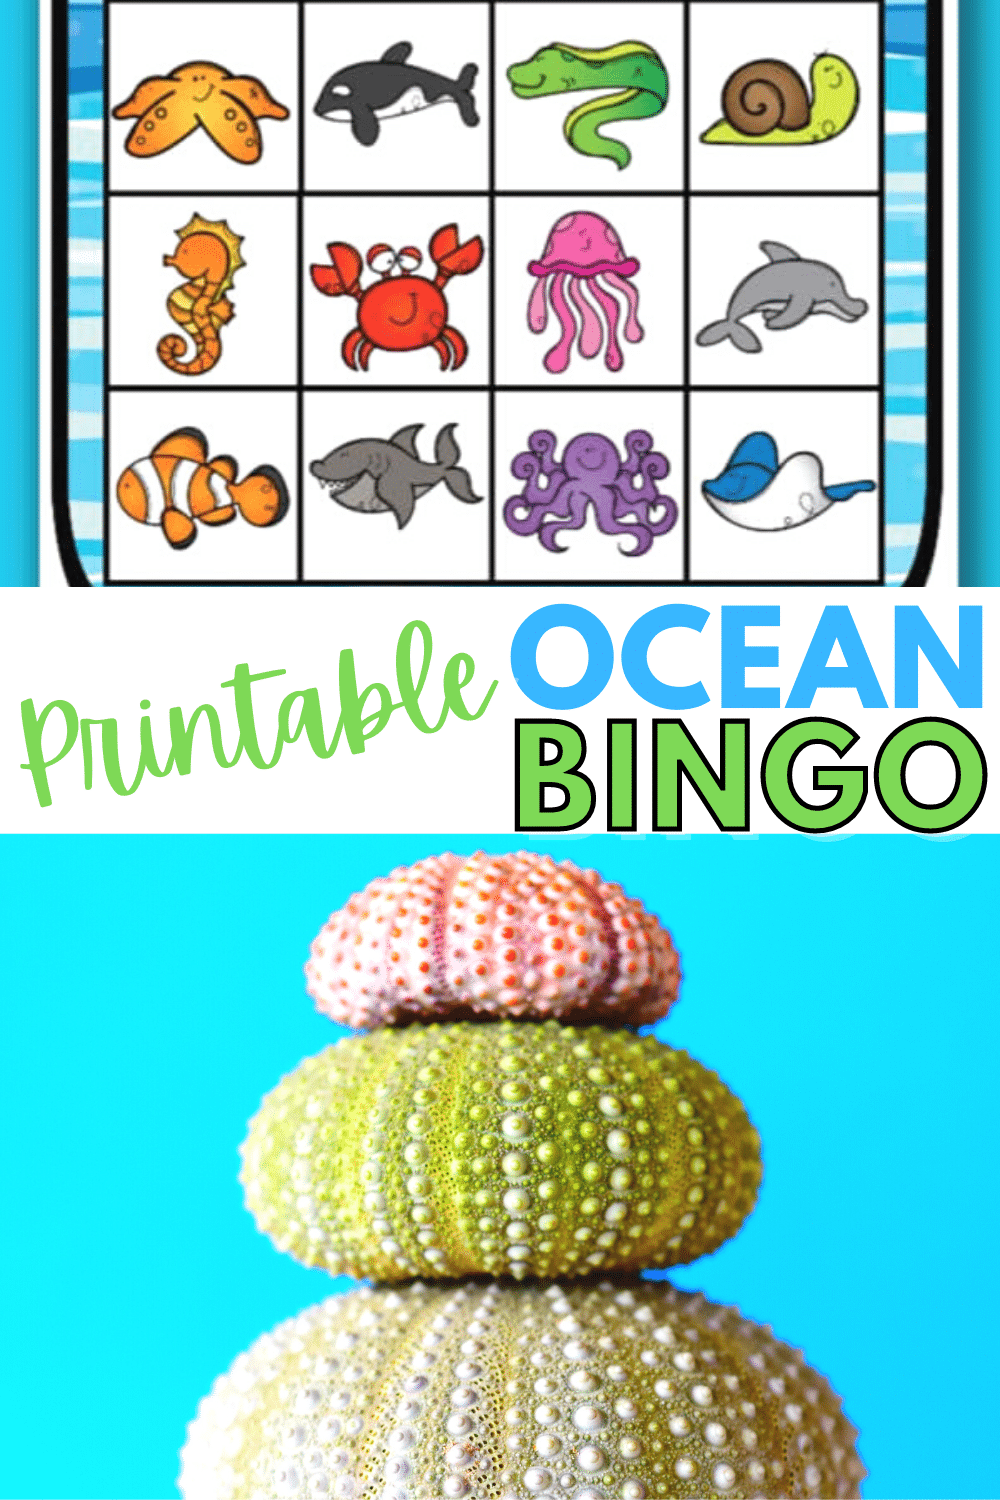 This printable ocean bingo game is great for tropical themed parties. Six unique bingo cards make this a great kids activity. #bingo #printables #ocean via @wondermomwannab